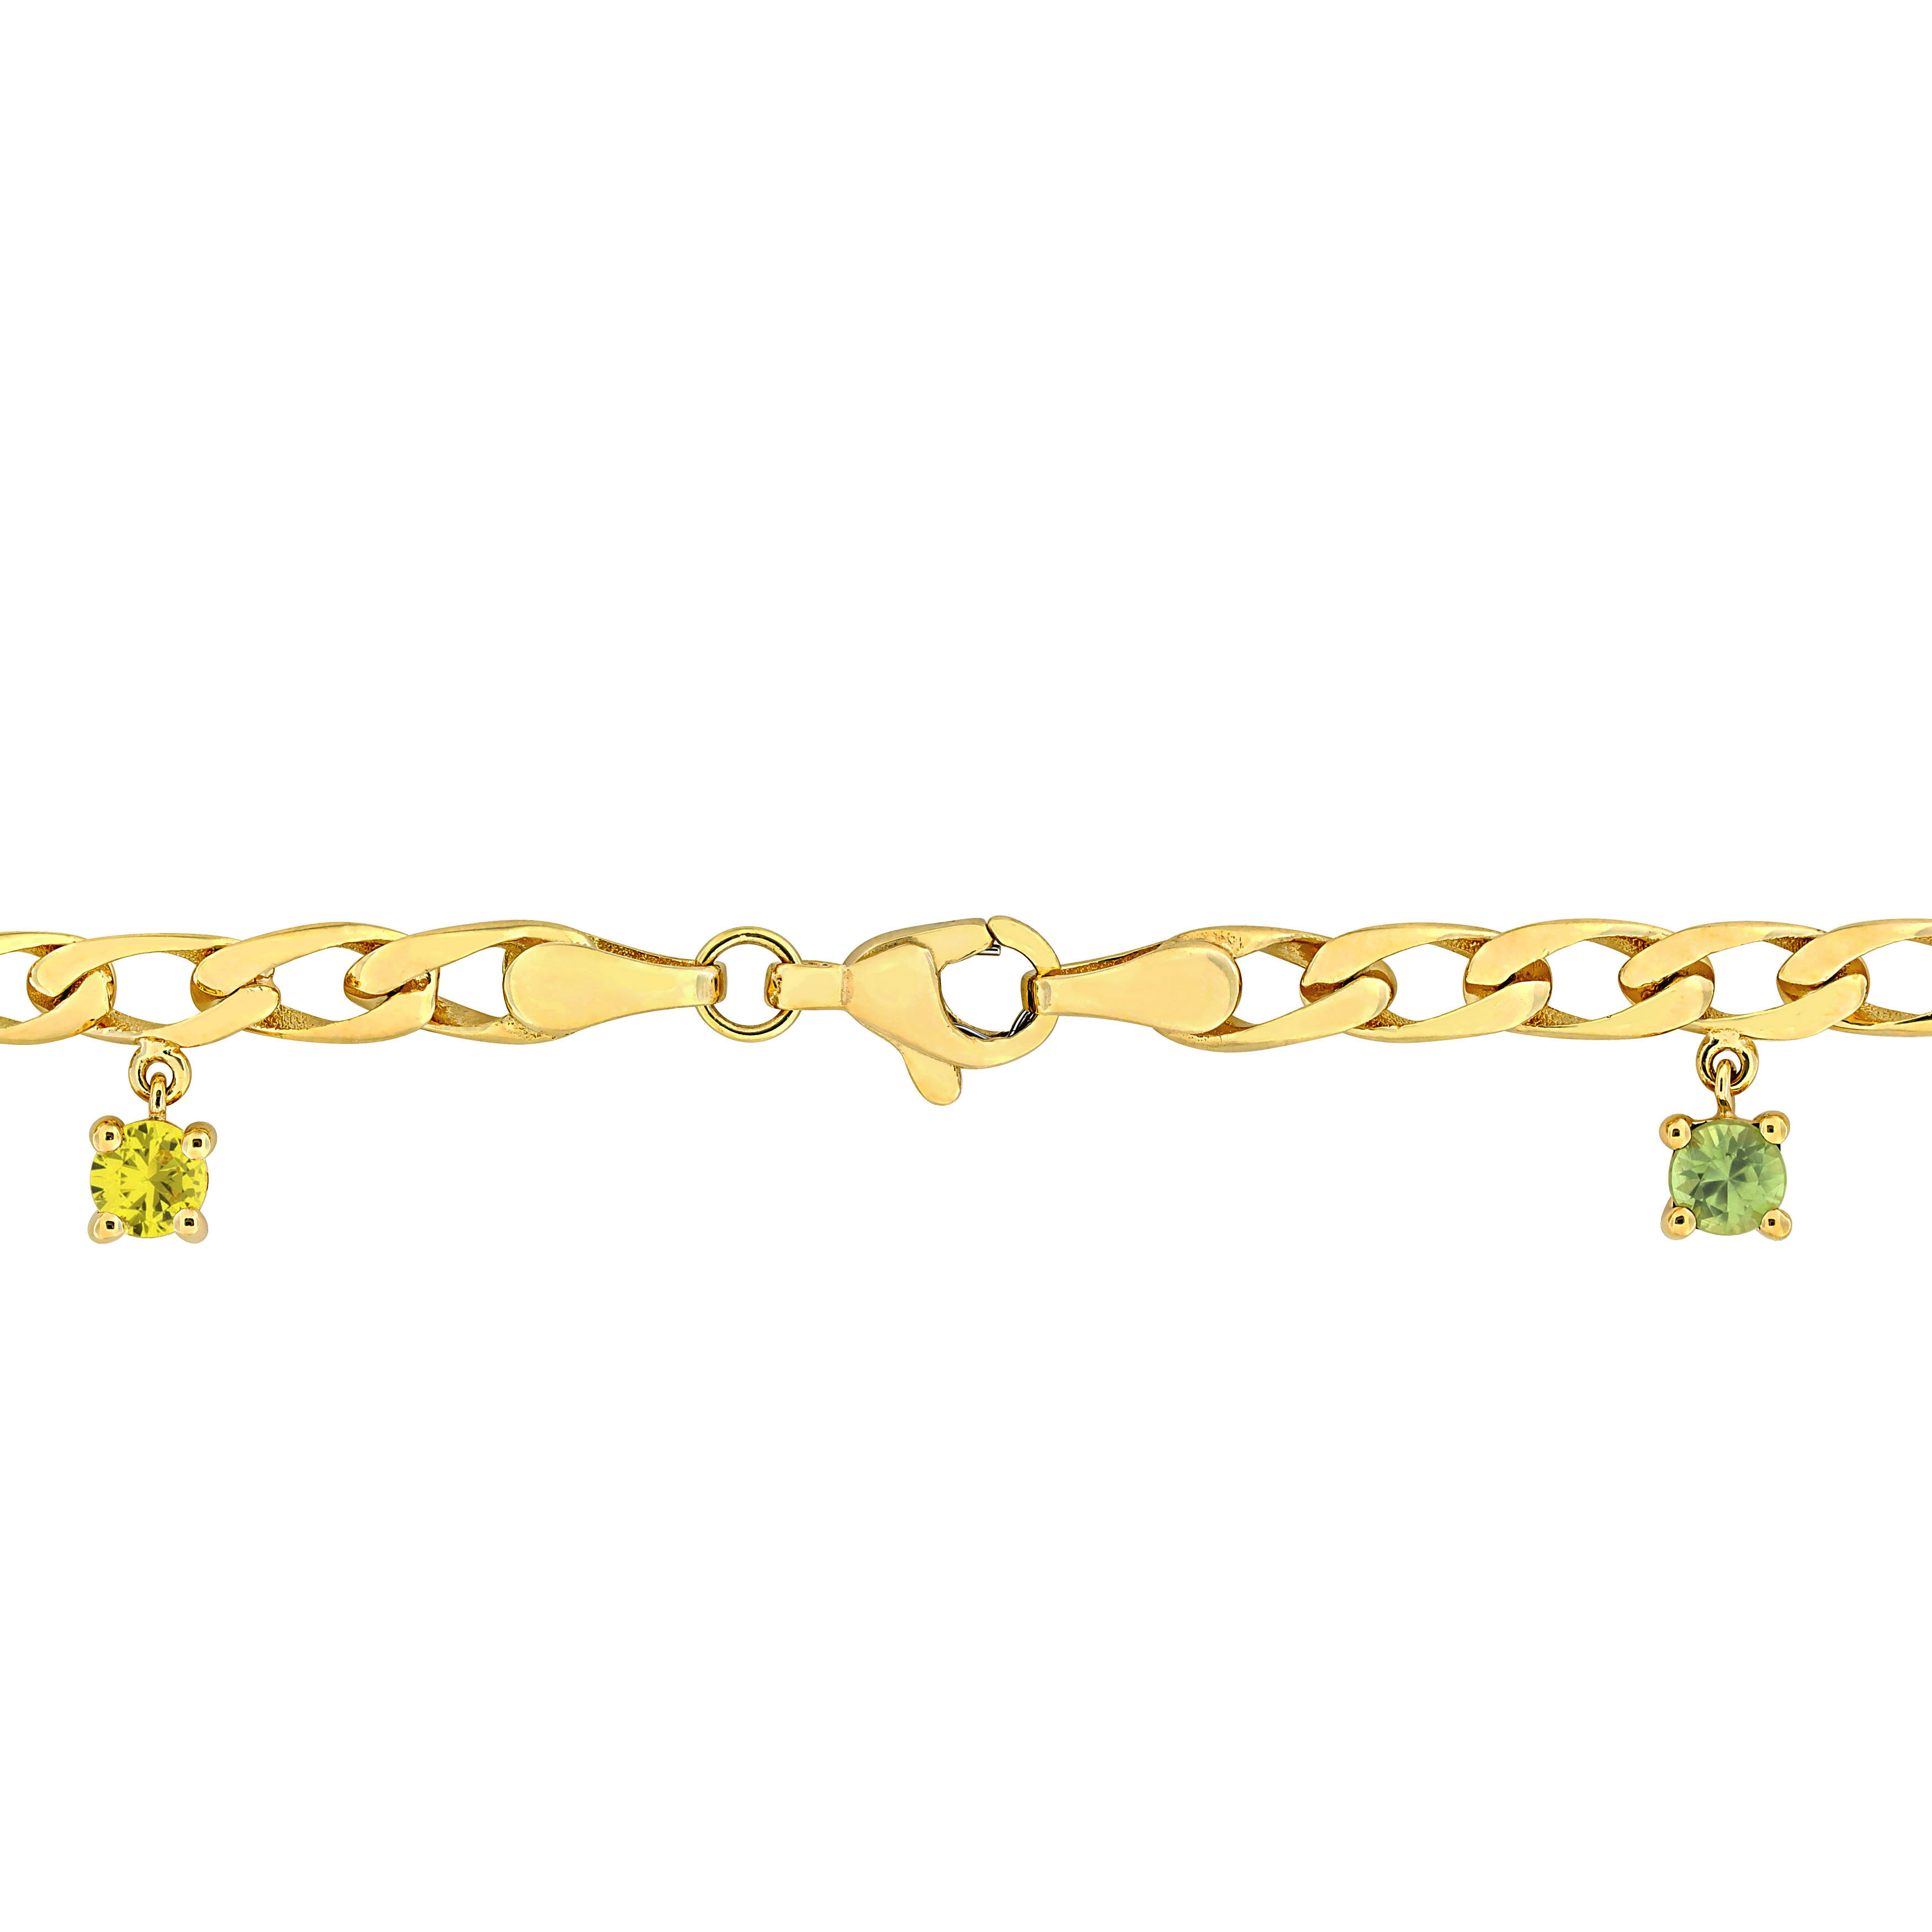 7/8 CT TGW Yellow Green and Orange Sapphire Charm Bracelet in 10k Yellow Gold - 7.5 in.